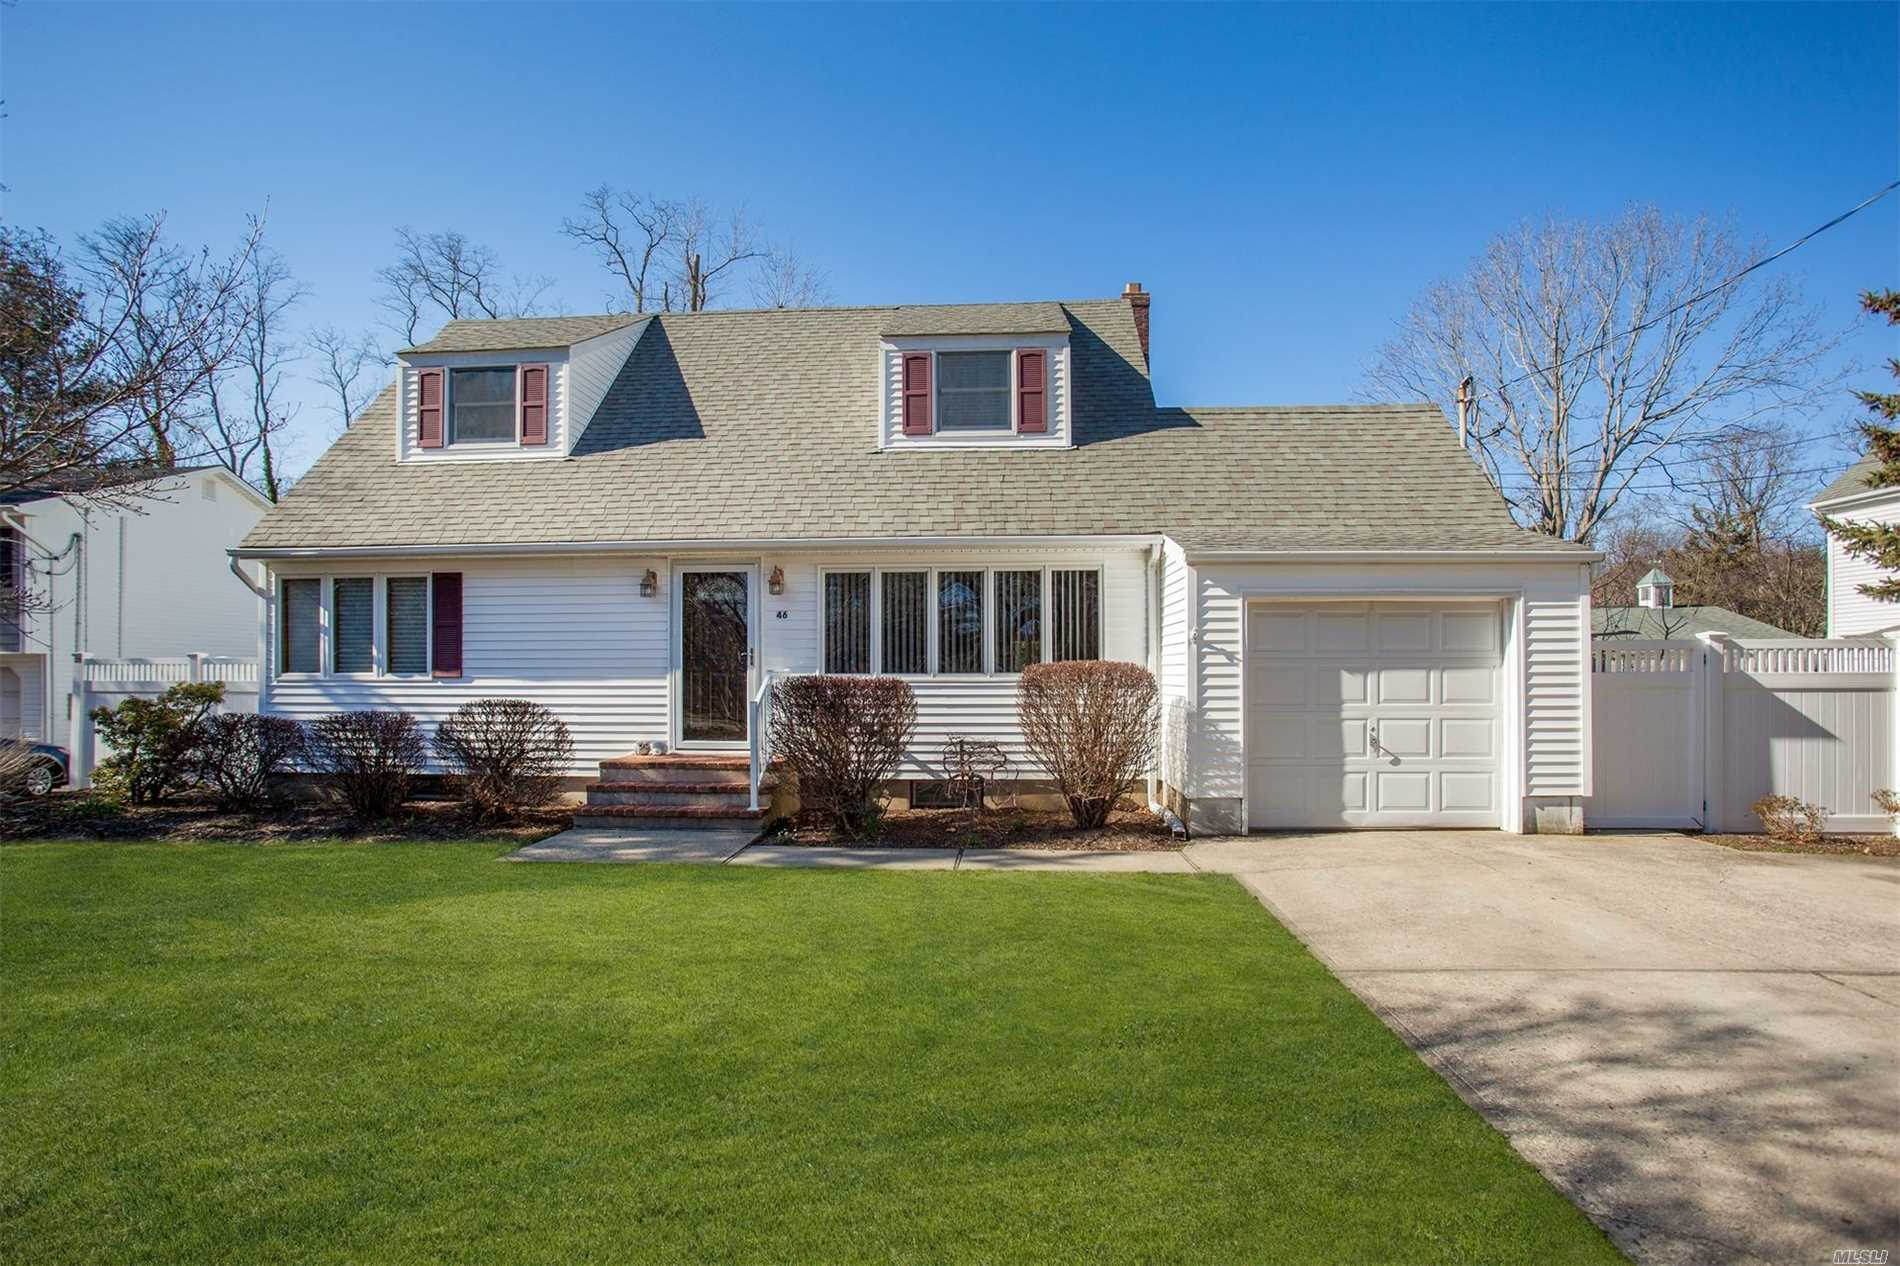 Beautiful Cape off Cul-de-Sac Walk to Beach! Spacious Expanded & Remodeled in 2001 & 2016. Bright Open Floor Plan w/Chef&rsquo;s Kitchen, SS Appliances, Wolf Pro 6-Burner Gas Range, Quartz Counter, New Sub-Floor, Stunning Plank Flooring. Entertaining Finished Basement w/Built-in Bar & Bathrm, Huge Mster bdrm Suite w/Dressing Alcove+ Full Bath, Jetted Tub.Stone Patio w/Hot Tub, Storage Shed; Two Driveways, PARK & ENTER HOME FROM SUNSET LANE (Cul-de-sac) #46 Mailbox. PLUS 13 mo Home Warranty!